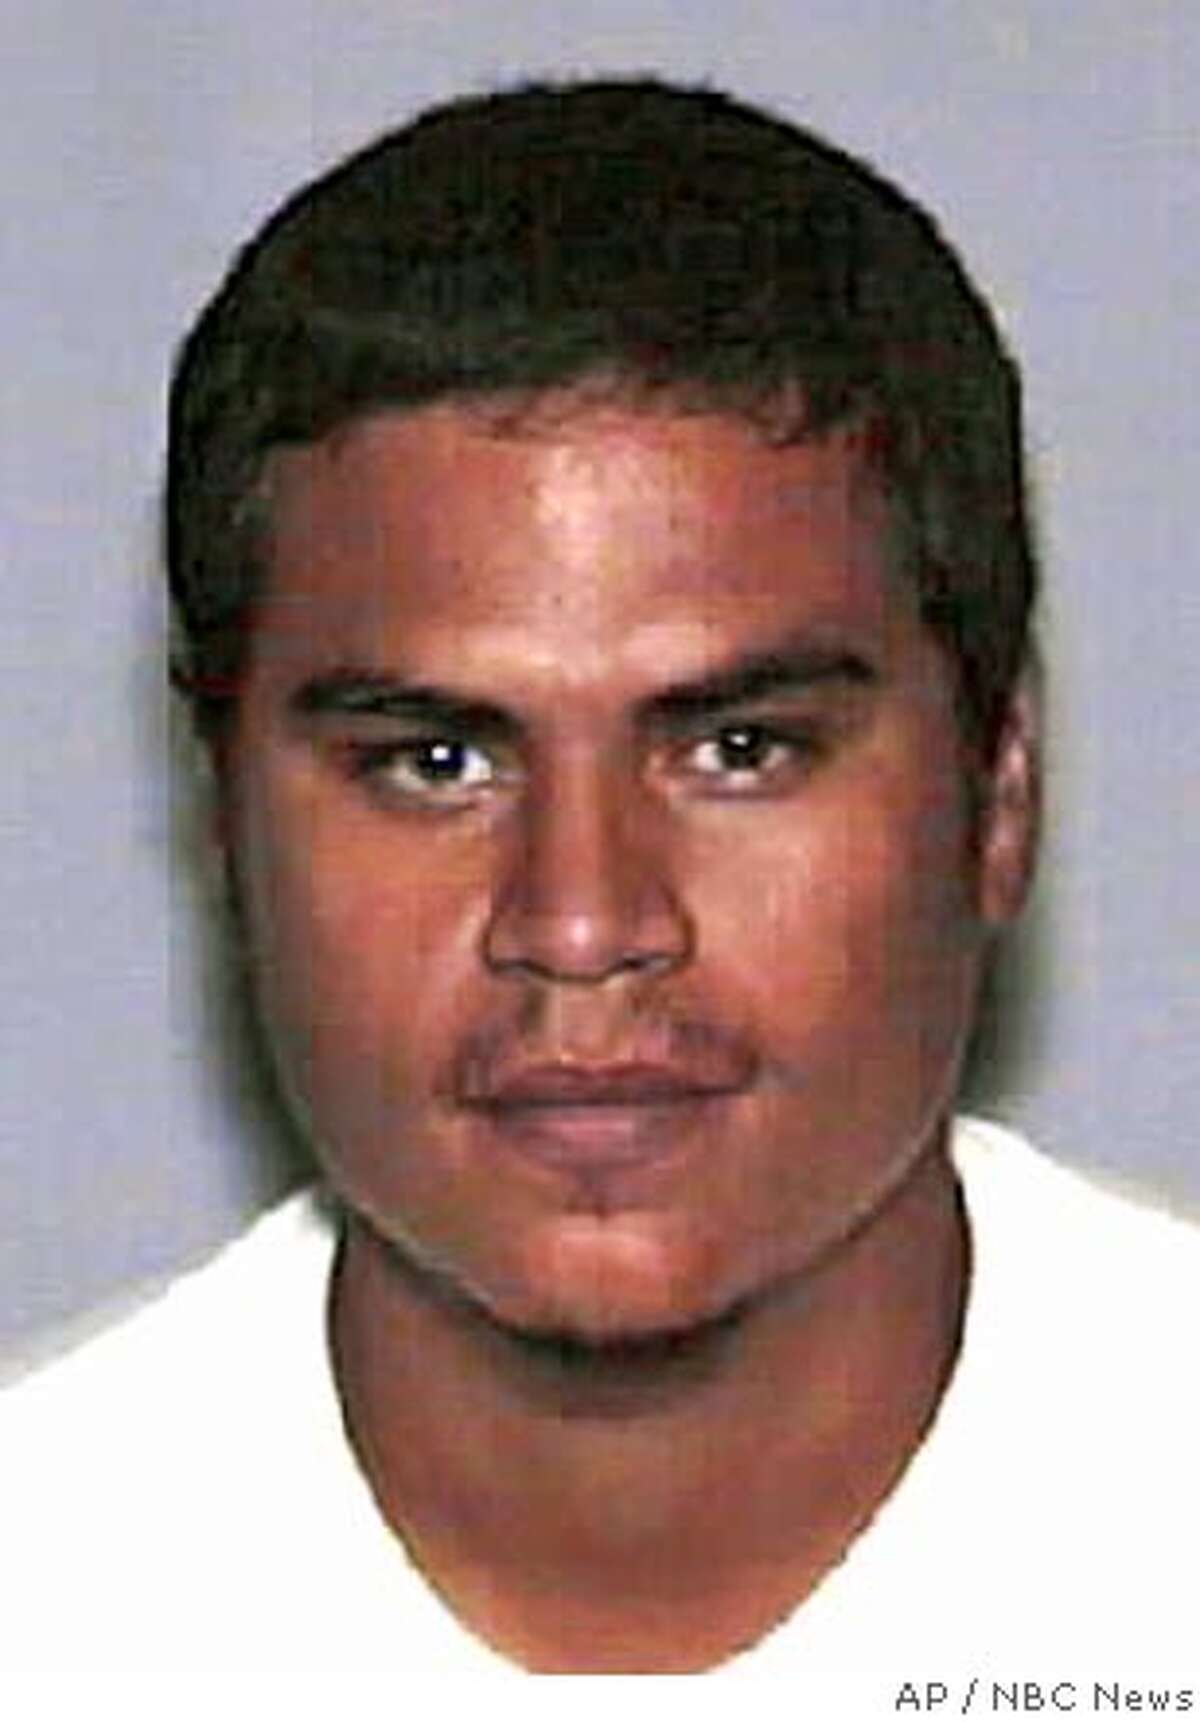 ** FILE ** Jose Padilla is shown in this undated photo. The Supreme Court agreed Friday, Feb. 20 2004. A federal judge will hear arguments Wednesday, Jan. 5, 2005, on whether the government can continue to hold Padilla, an accused terrorist and enemy combatant, without charges. Padilla, who was arrested in Chicago in 2002 as he was entering the country, has not been charged with a crime. The federal government alleges he was part of an al-Qaida plot to detonate a radiological "dirty bomb" in the UnitedStates. (AP Photo/NBC News, File) Ran on: 01-13-2005 Jose Padilla Ran on: 01-13-2005 Jose Padilla MANDATORY CREDIT/ONLINE OUT// /UNDATED FILE PHOTO